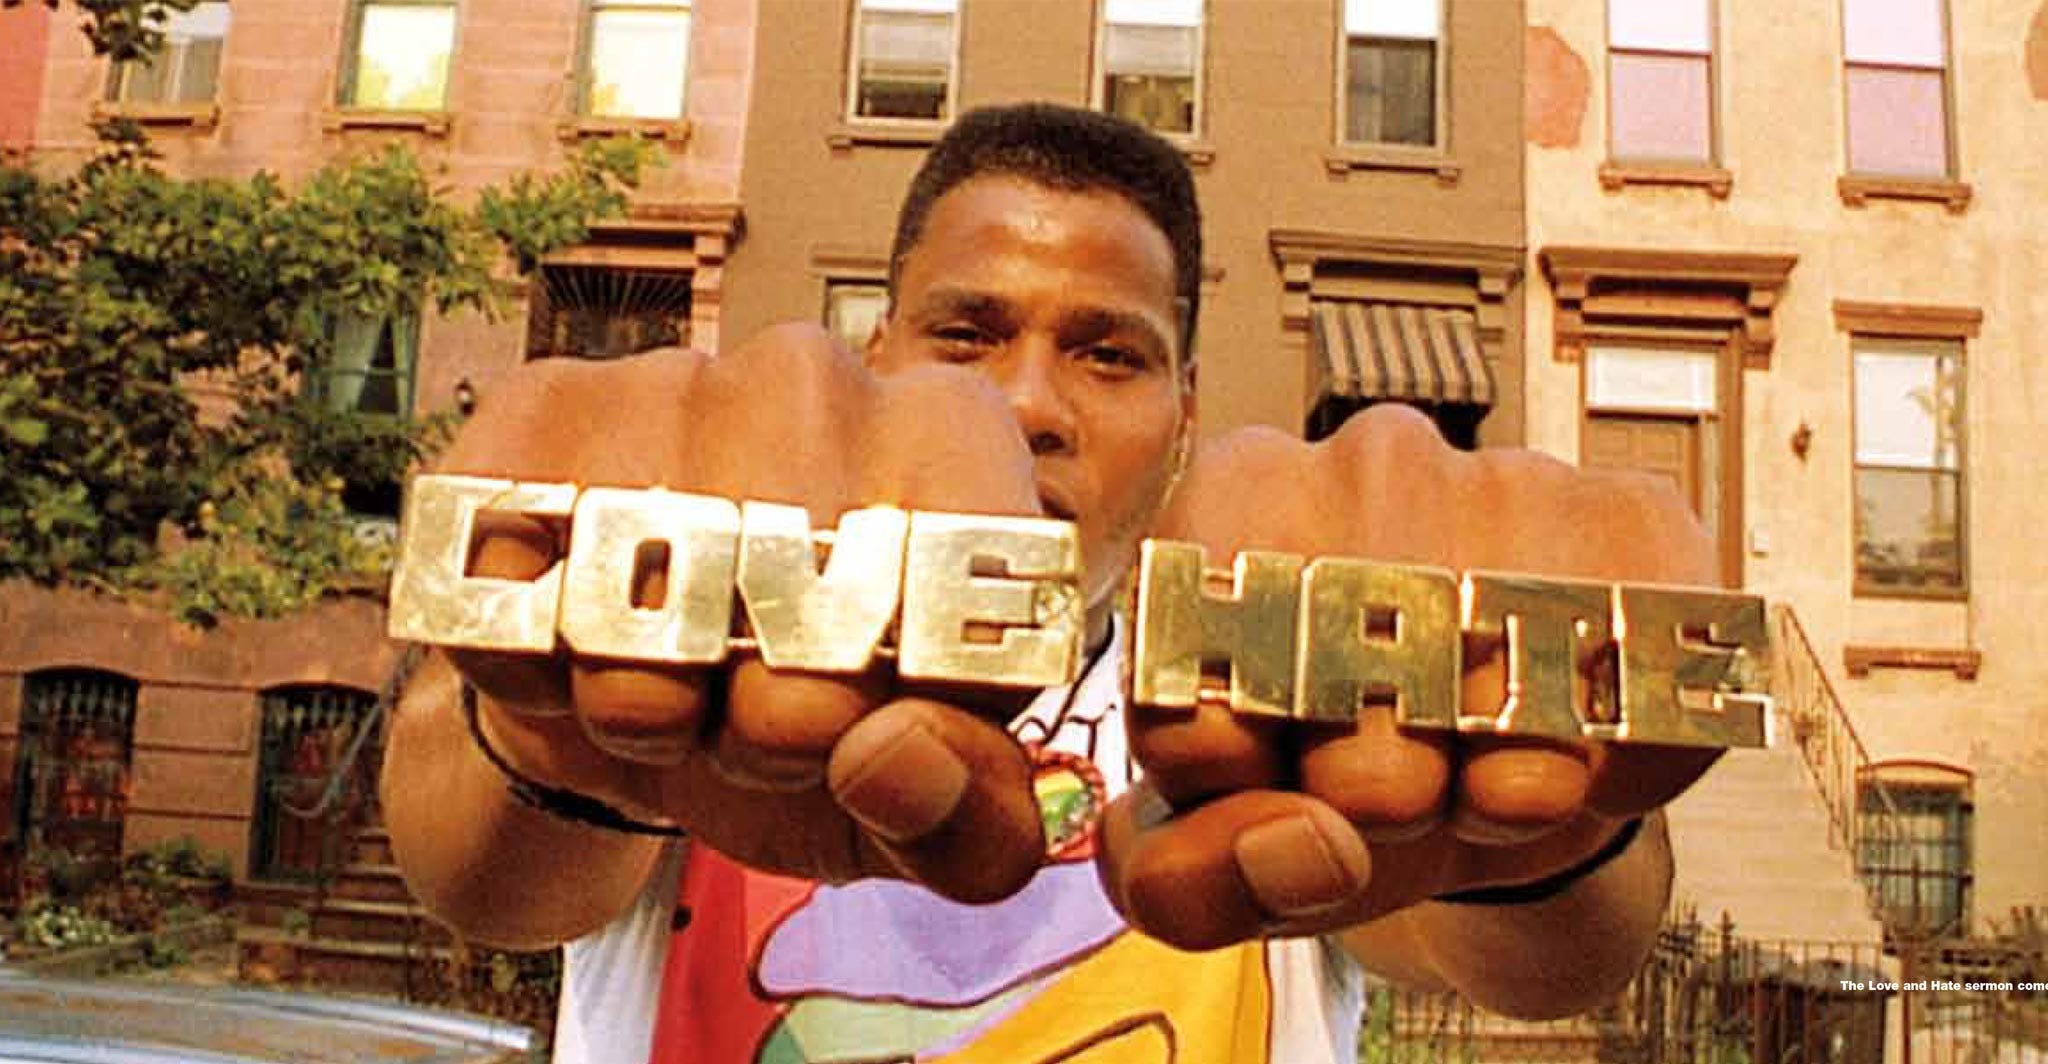 <p>Spike Lee knows the power of a good intro, and the opening credits of Do The Right Thing - a montage of Rose Perez dancing set to Public Enemy's "Fight the Power" - is absolutely explosive.</p>